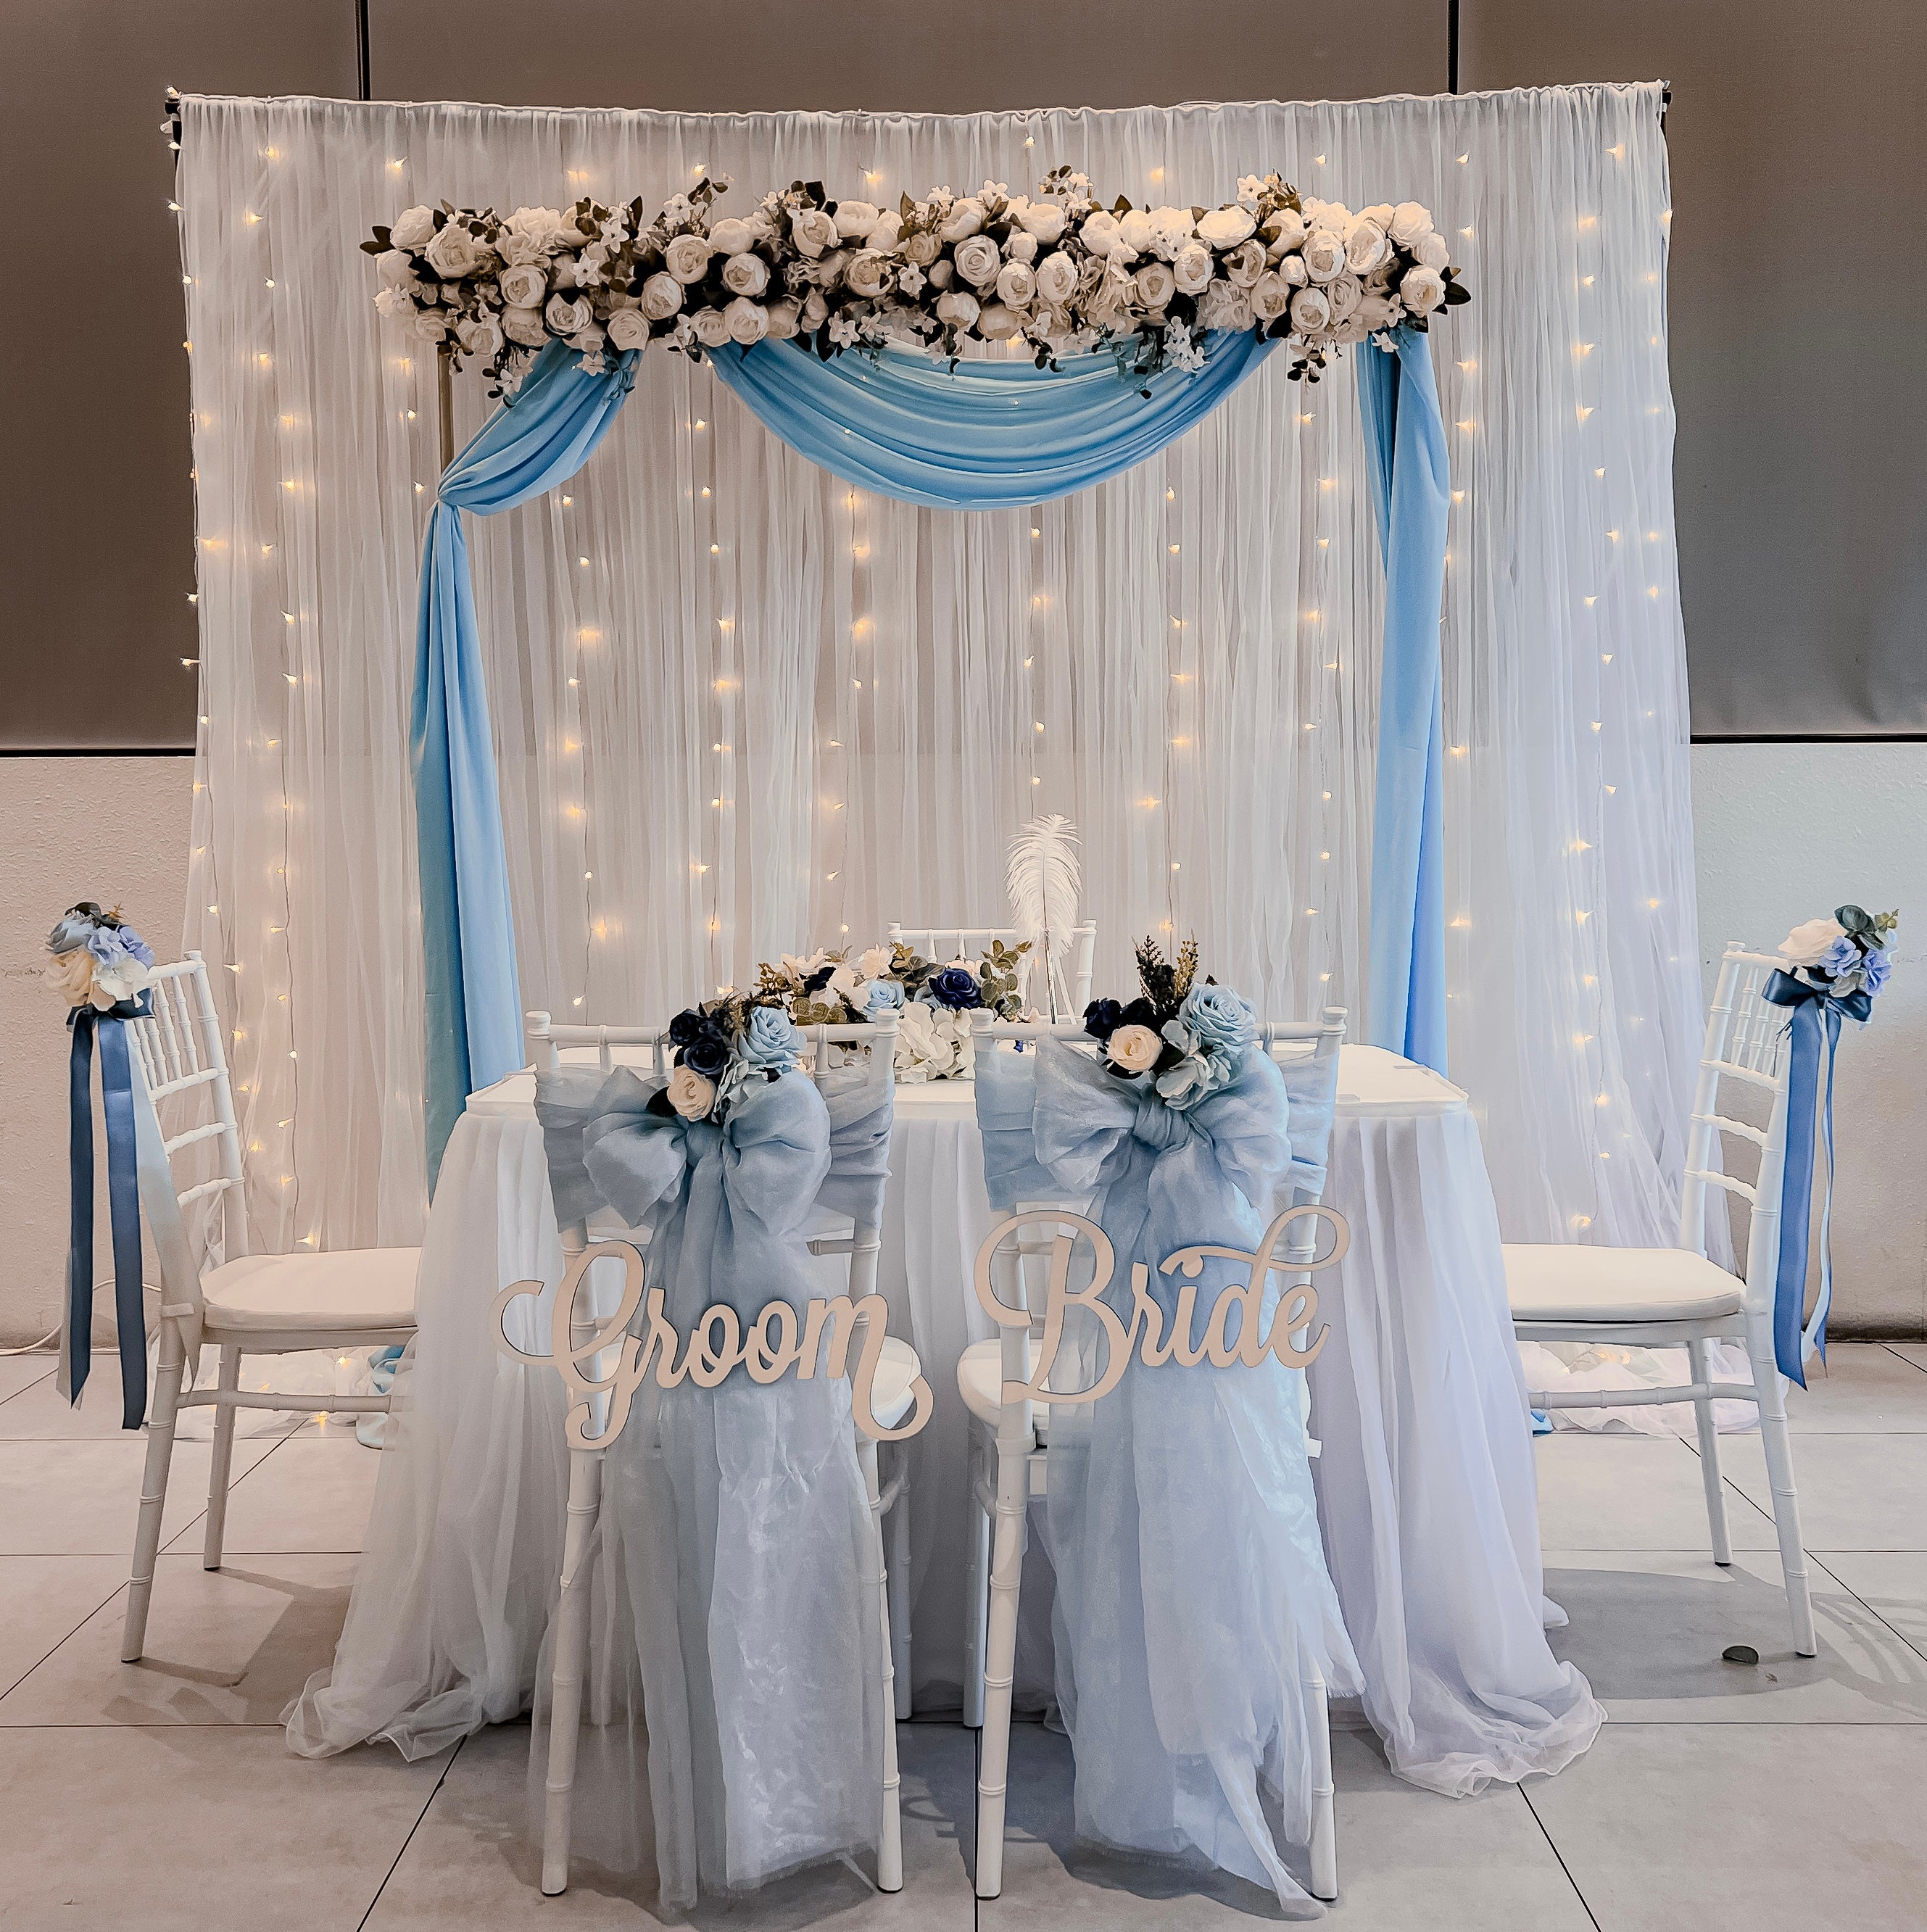 Sweet and Simple Home/Function Room Solemnisation/ROM Decor in Singapore - Blue & White Theme with Fairy-lights (Venue: HomeTeam Khatib)